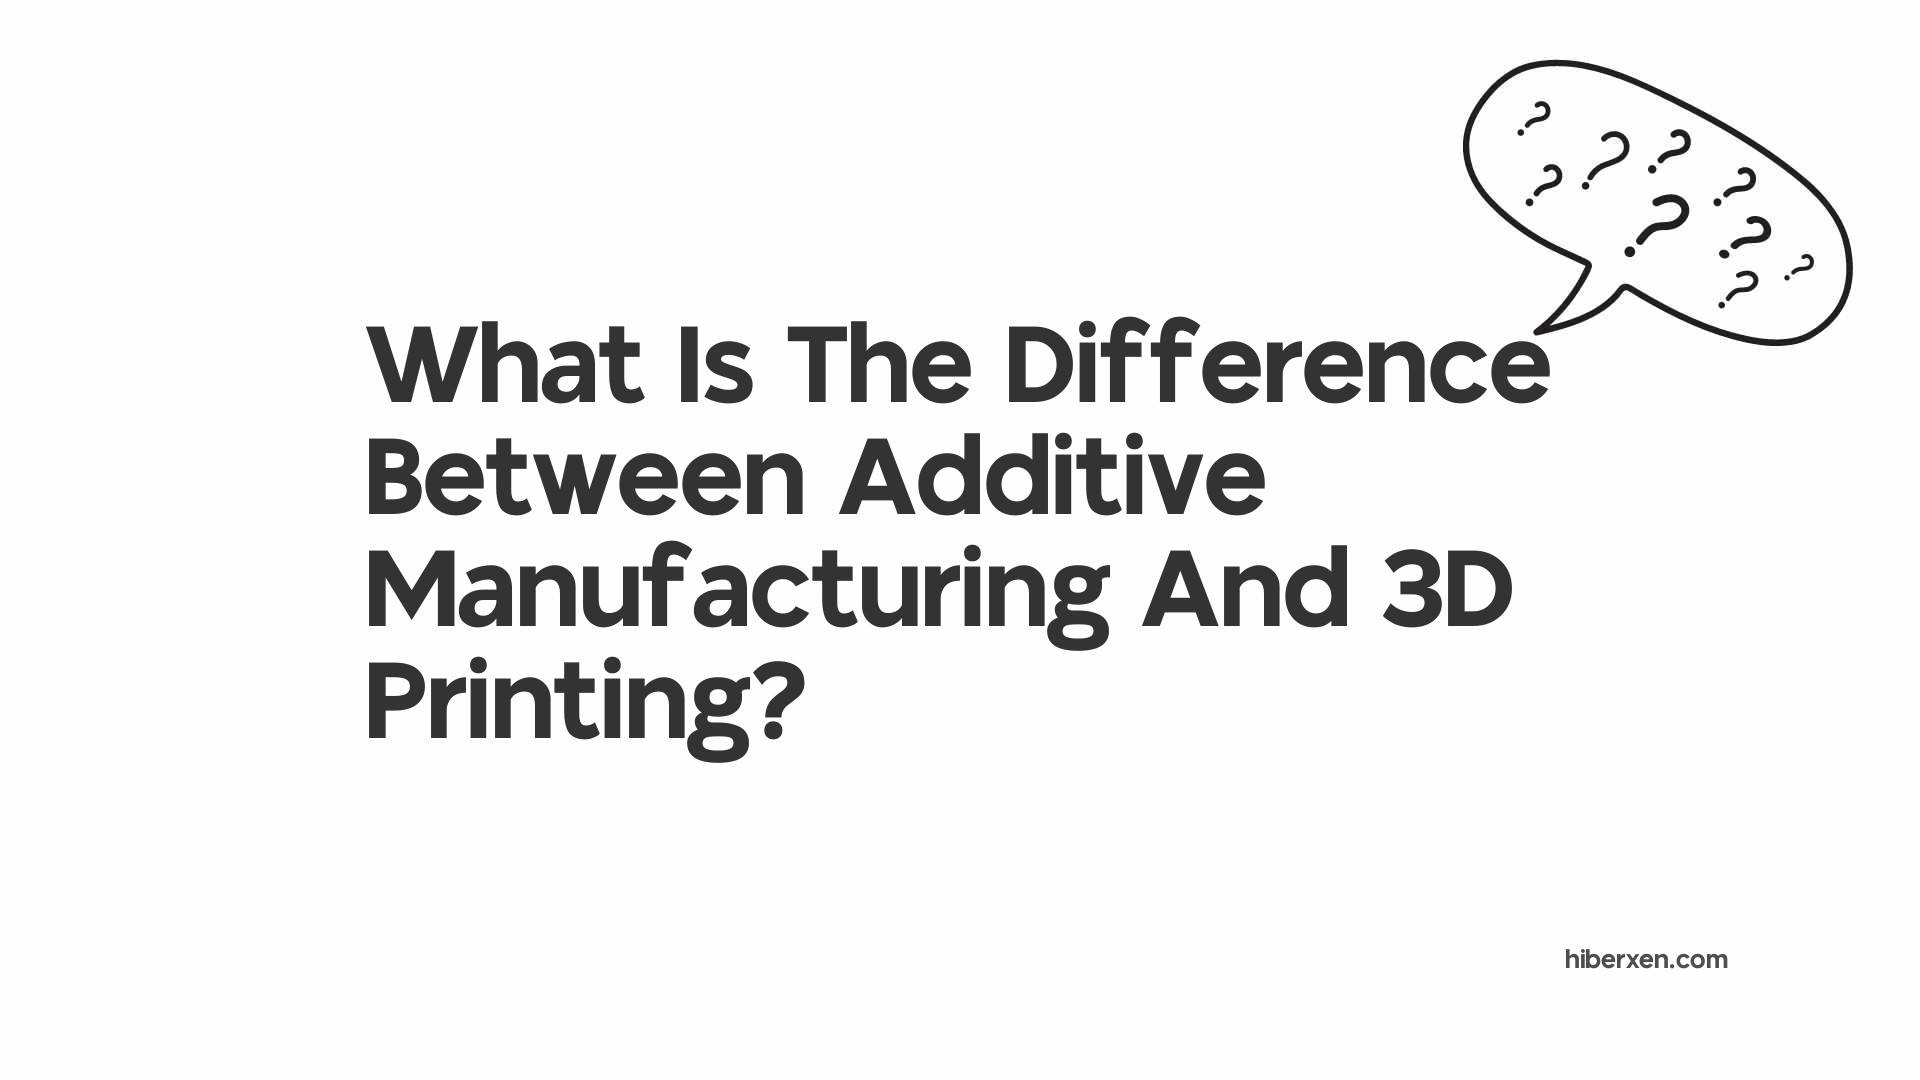 What Is The Difference Between Additive Manufacturing And 3D Printing?